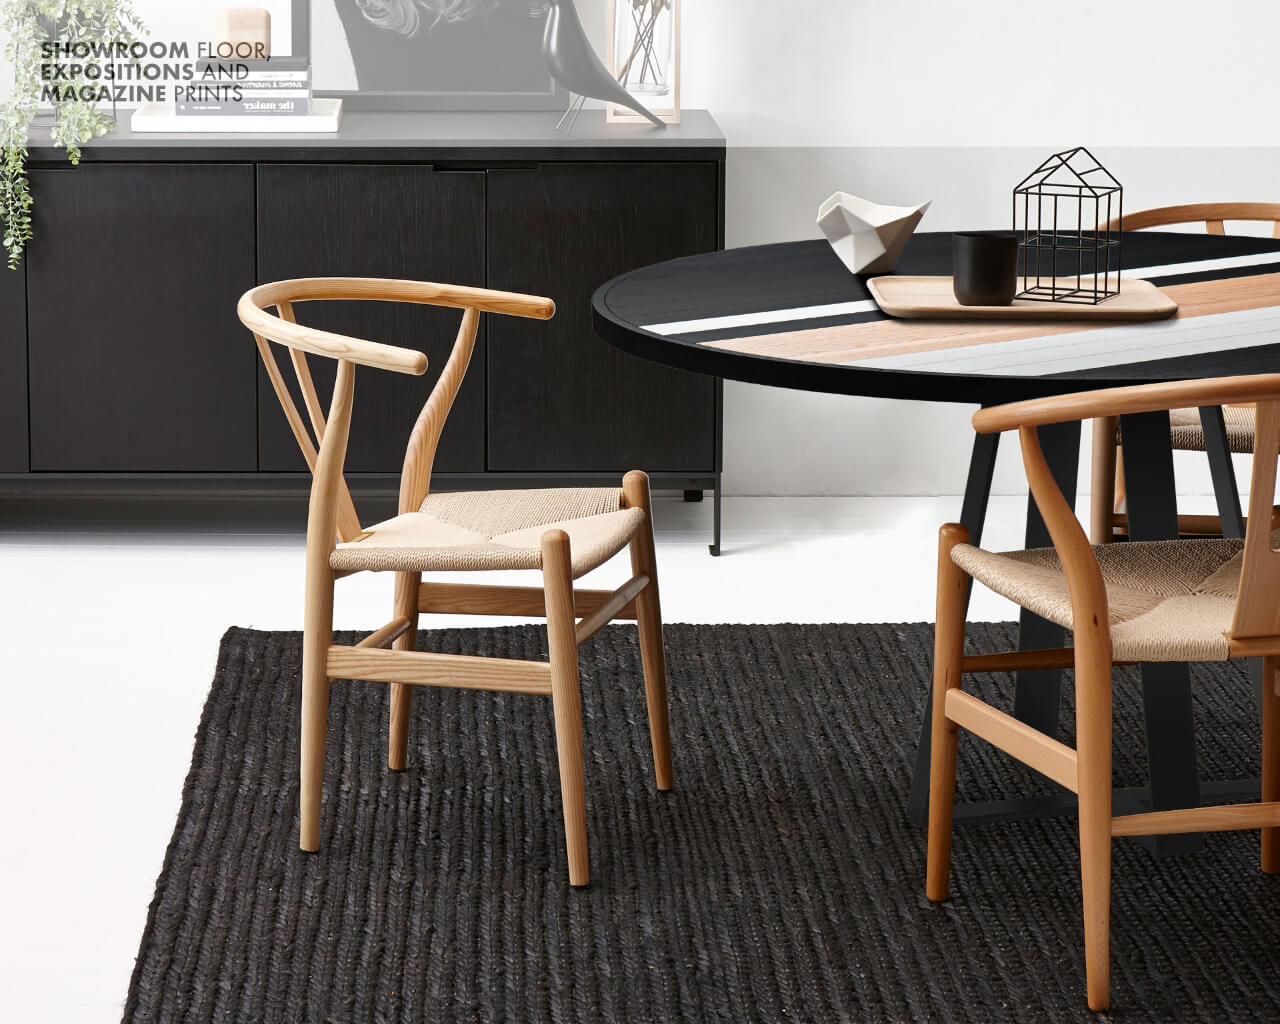 Soto Round Dining Table